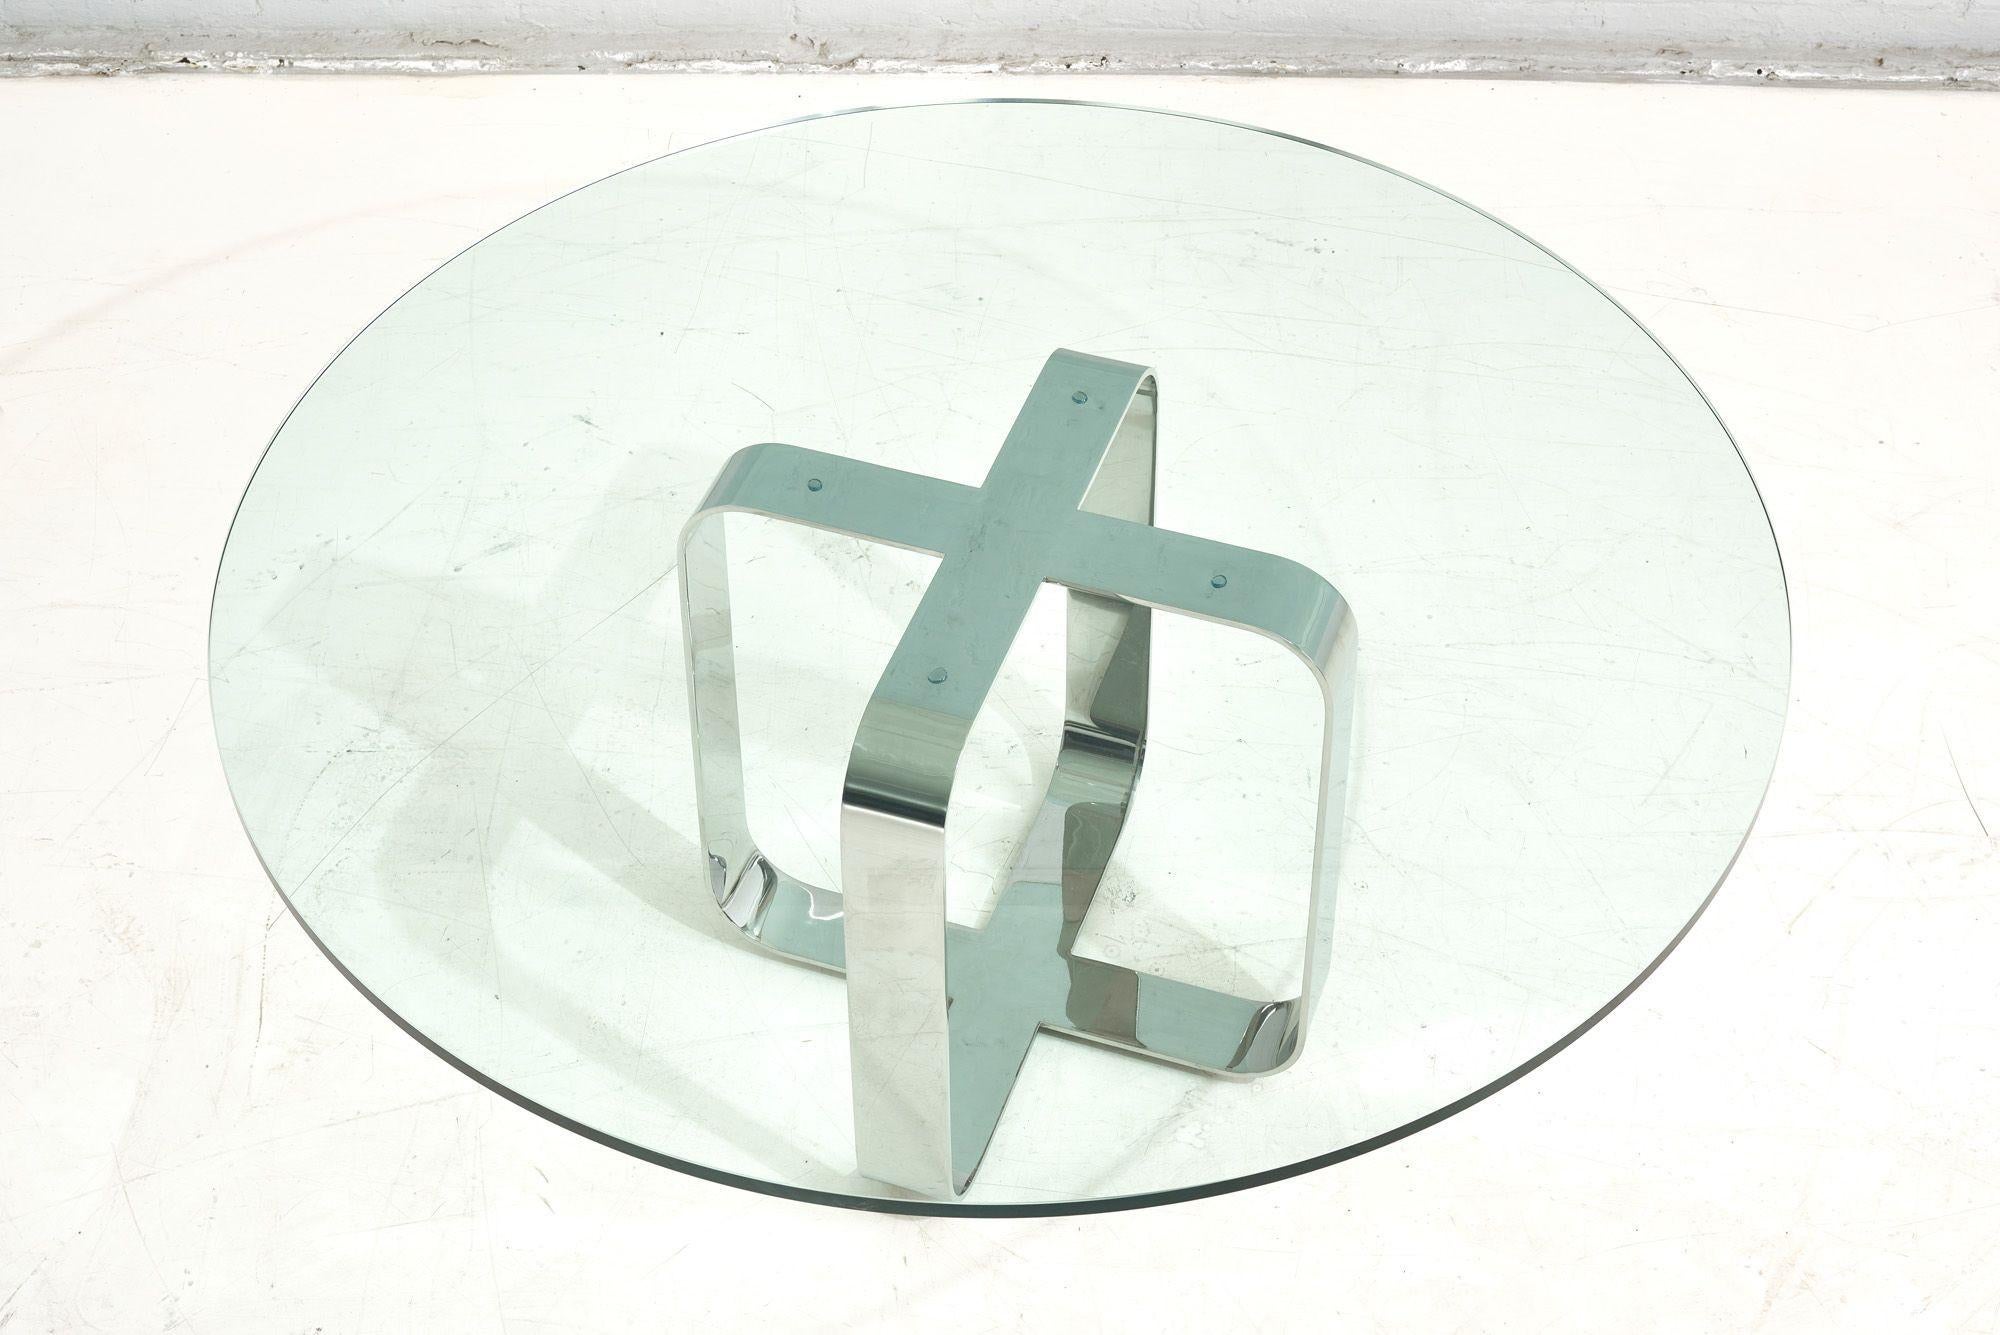 American Gary Gutterman Stainless Steel and Glass Dining Table, Axius Designs, 1970 For Sale